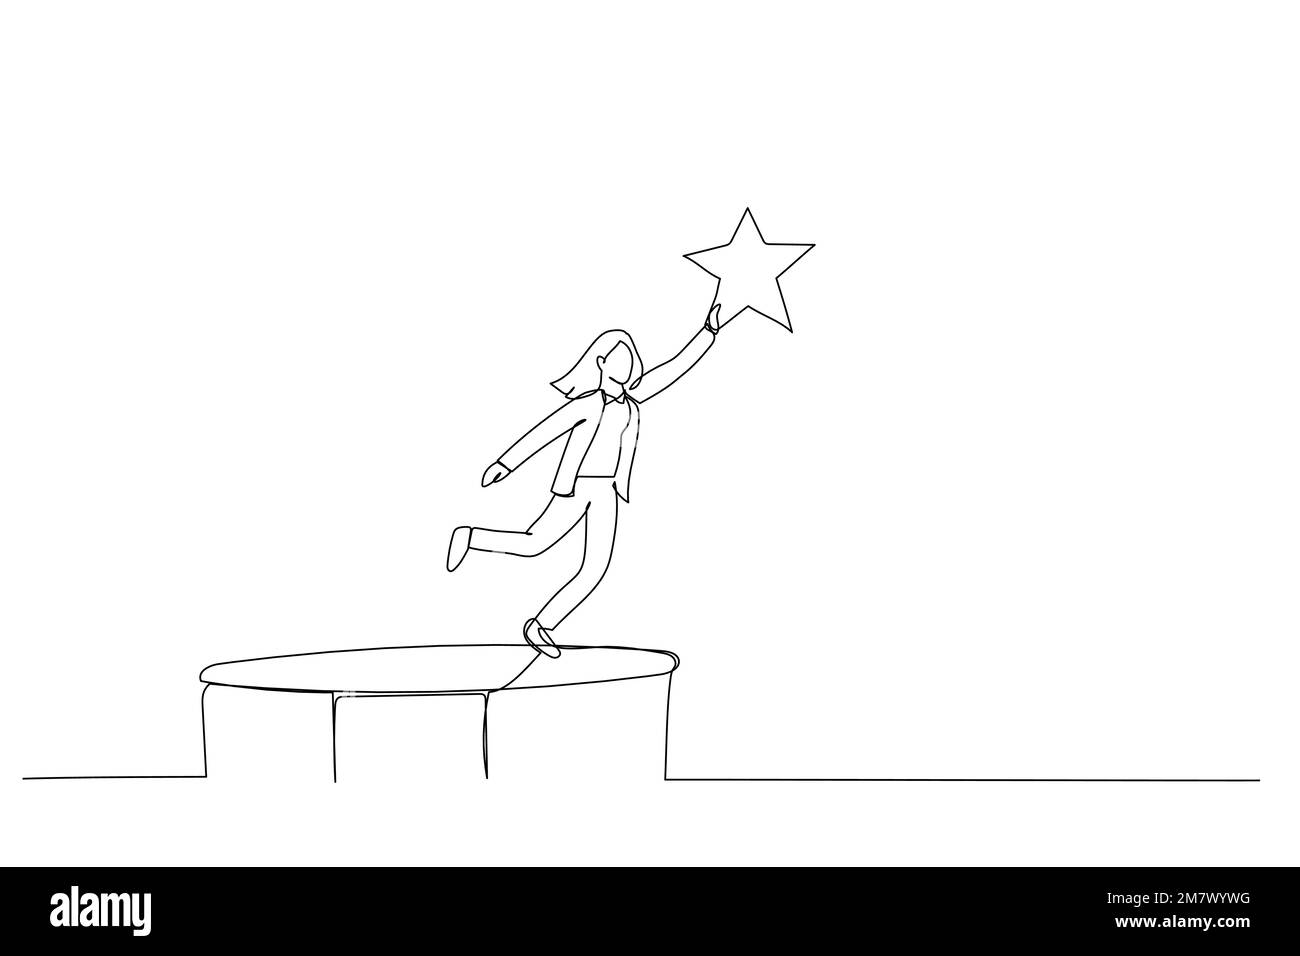 Cartoon of businesswoman bounce on trampoline jump flying high to grab star. Metaphor for achievement. Single line art style Stock Vector